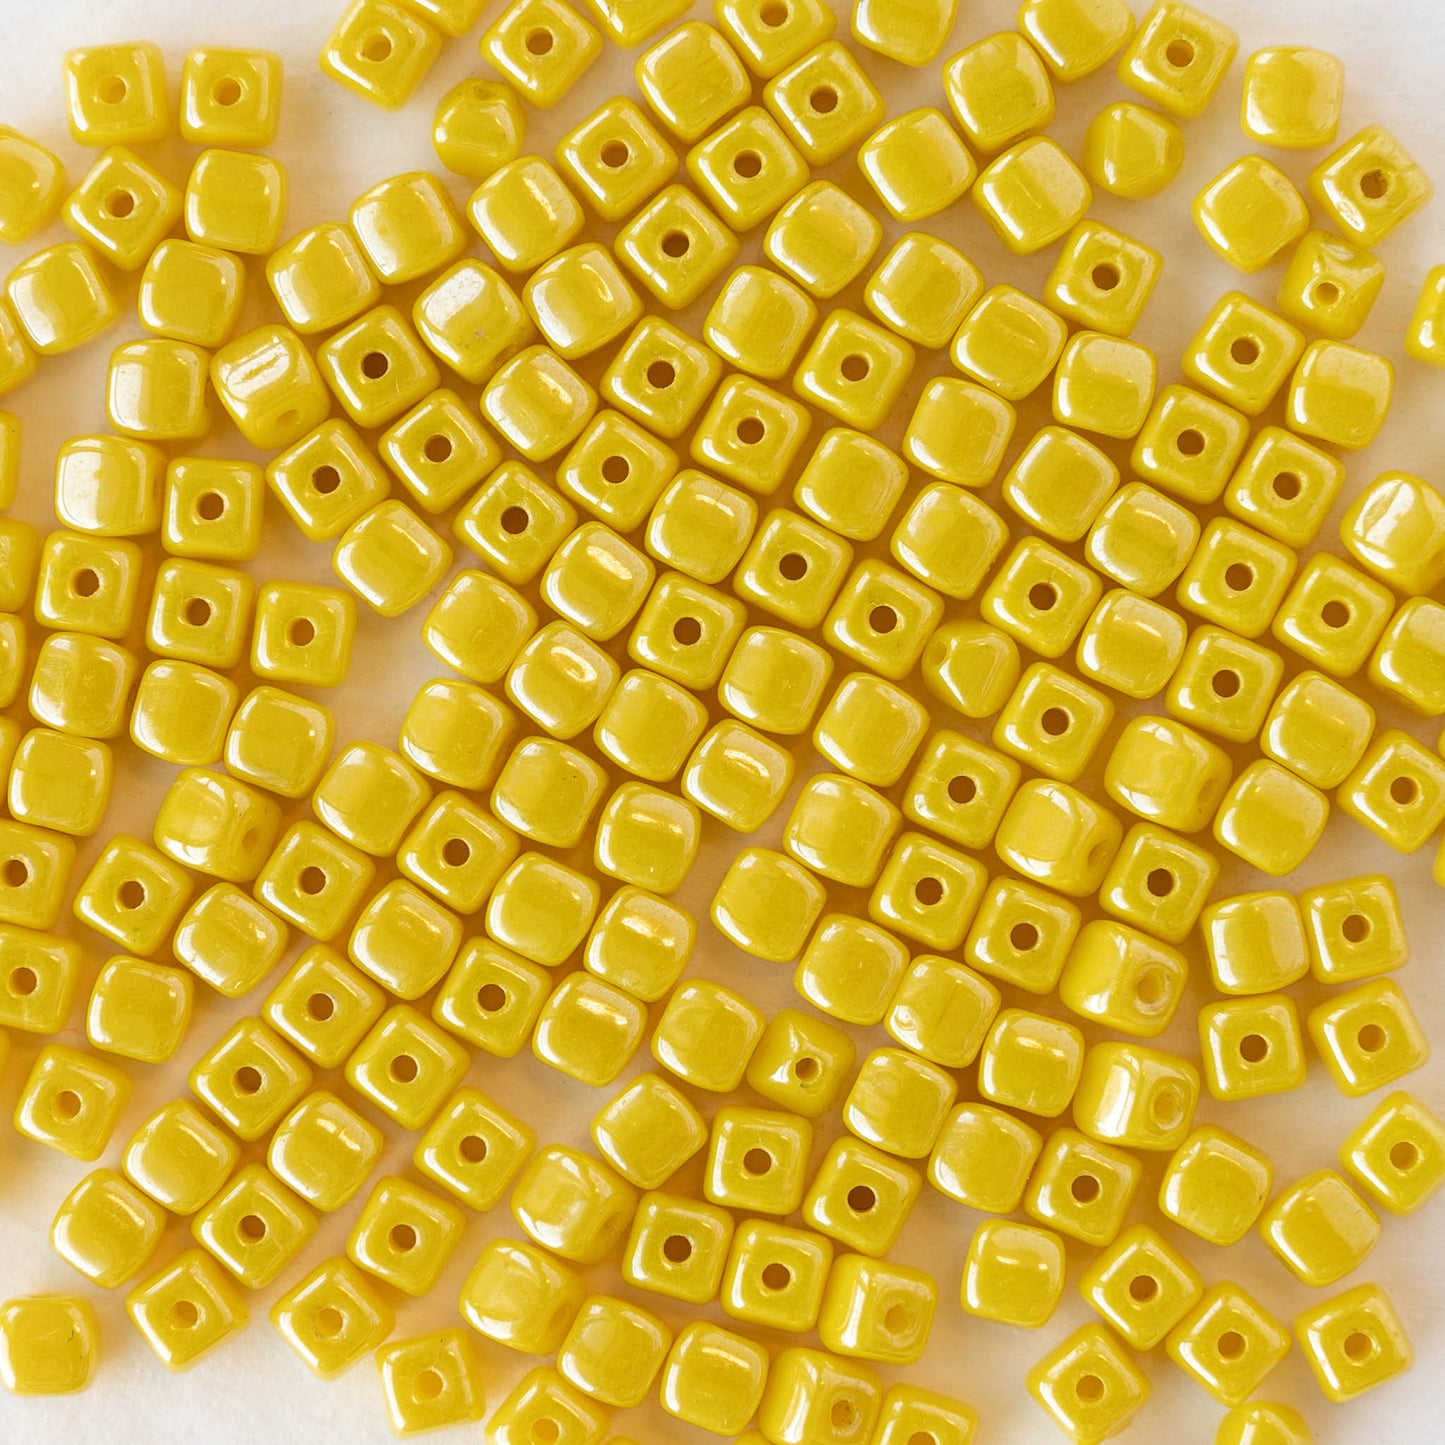 4mm Glass Cube Beads - Opaque Yellow - 100 beads